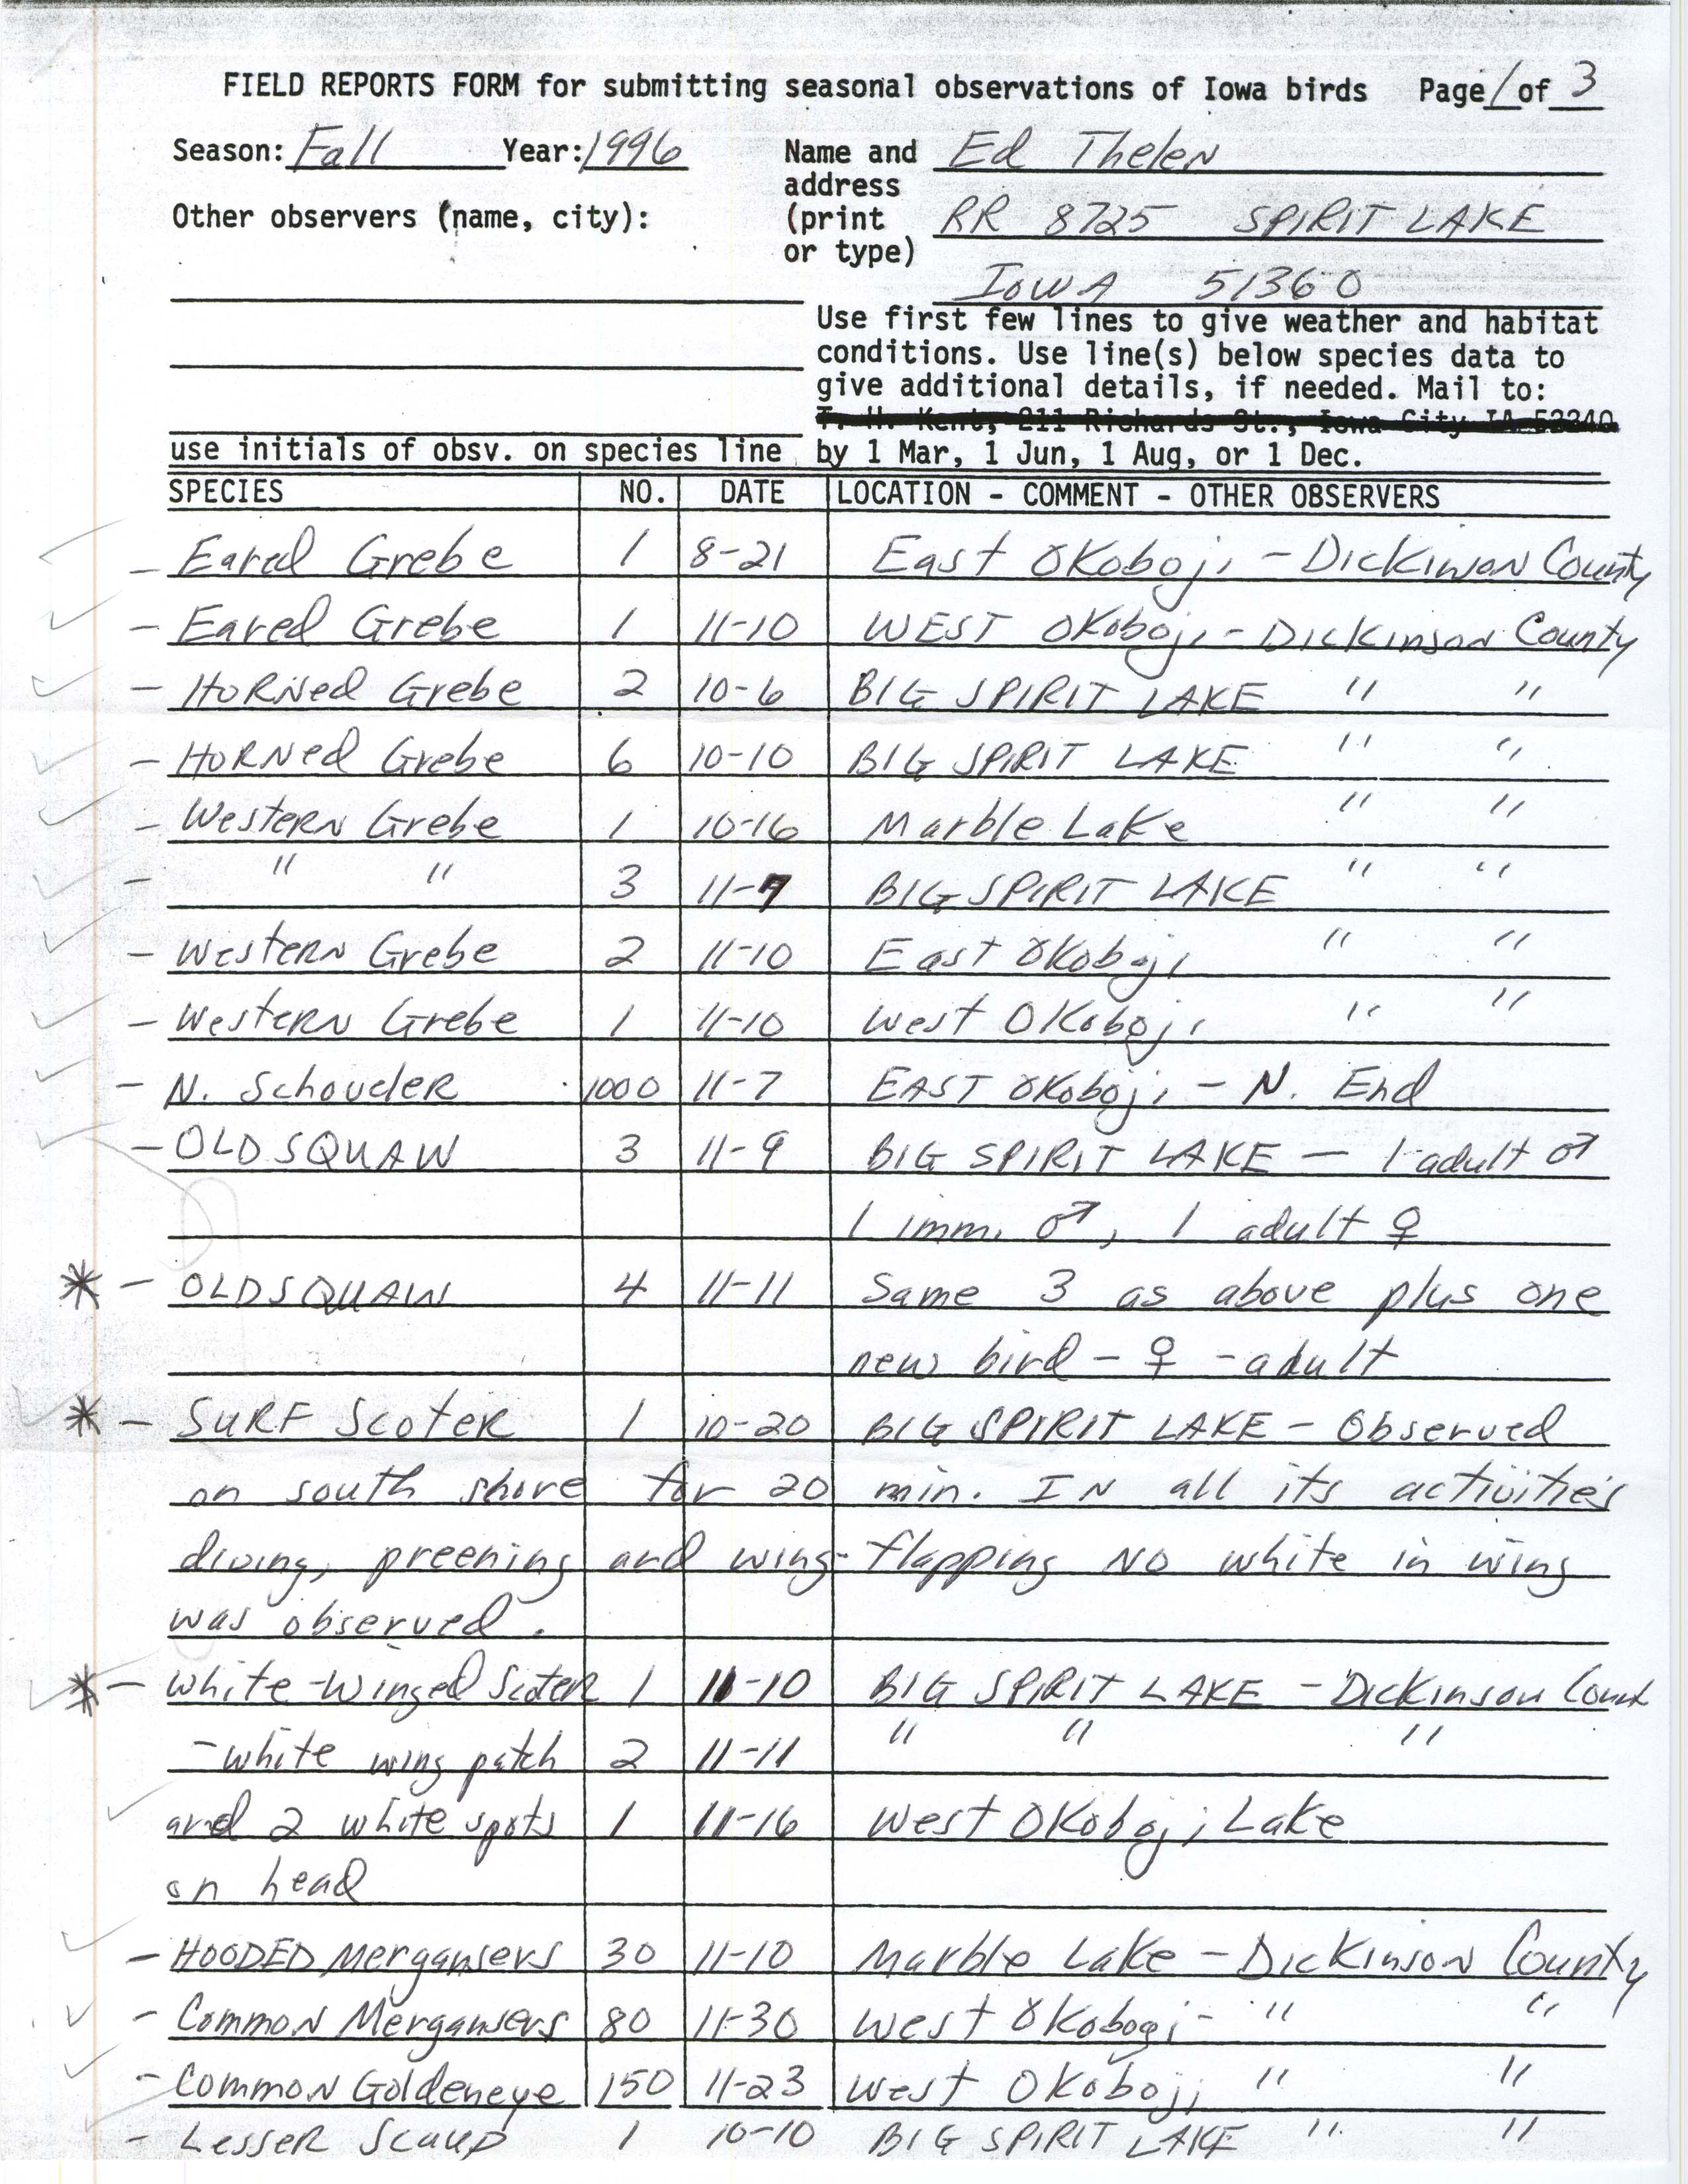 Field reports form for submitting seasonal observations of Iowa birds, Ed Thelen, fall 1996